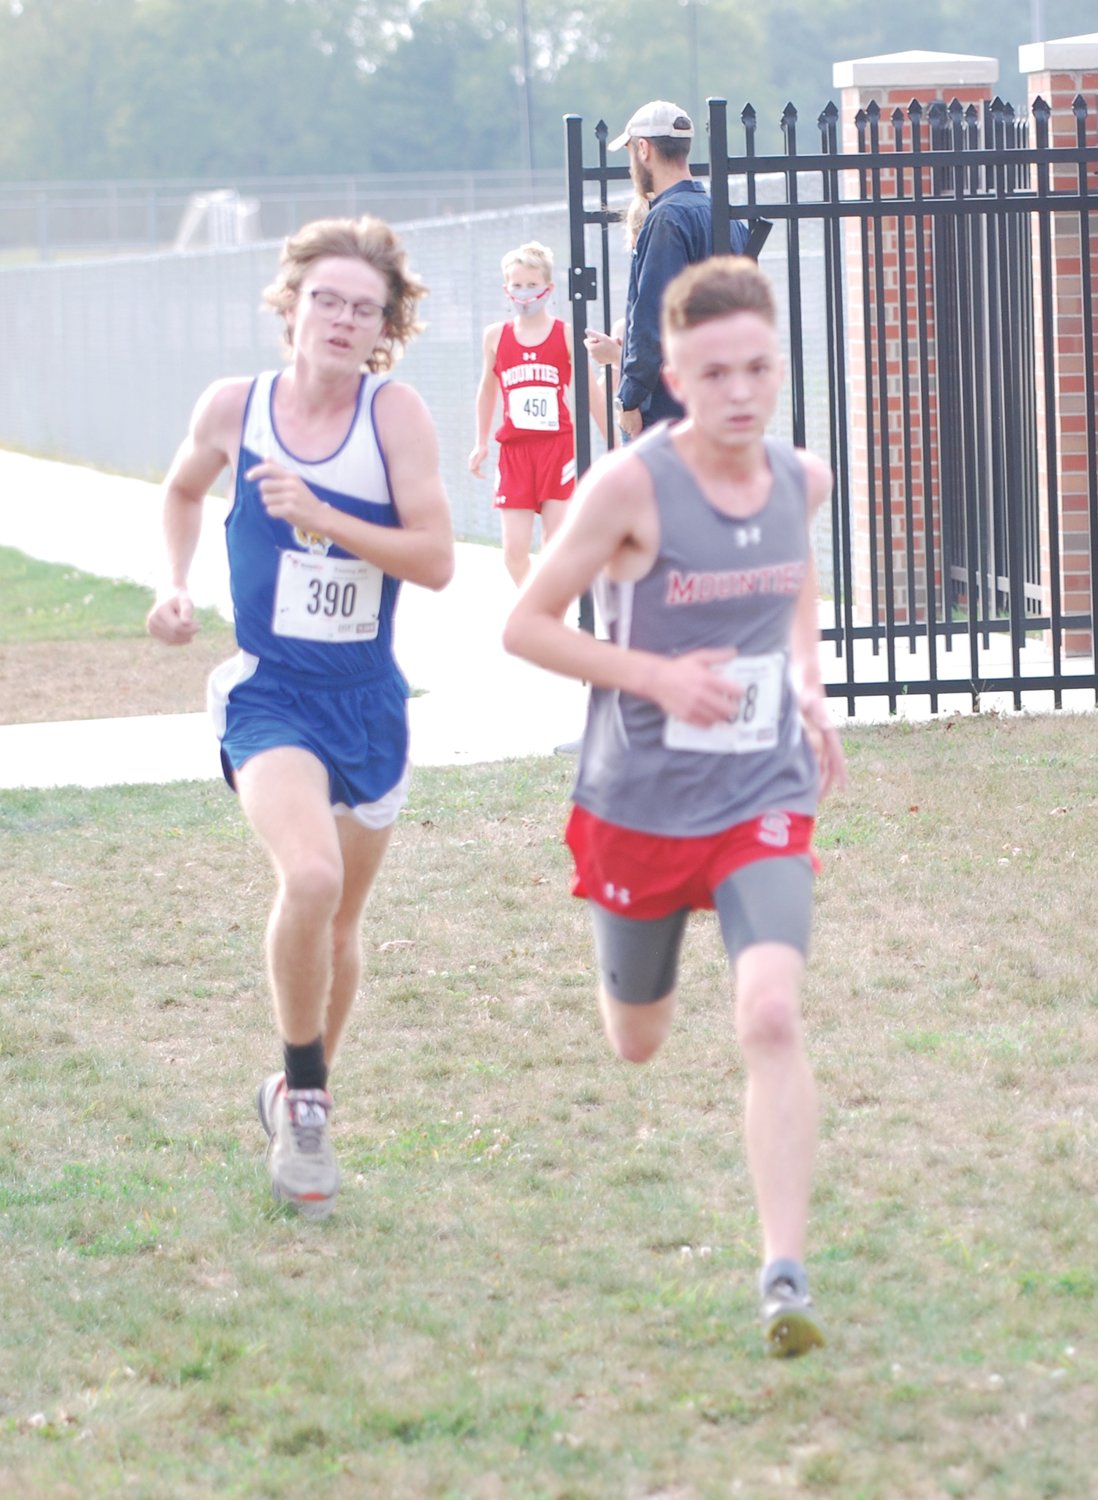 Crawfordsville's Hunter Hutchison and Southmont's Mason Cass were neck and neck on Thursday night before Hutchison passed Cass in the final 50 meters to win the Montgomery County meet with a time of 17:55.